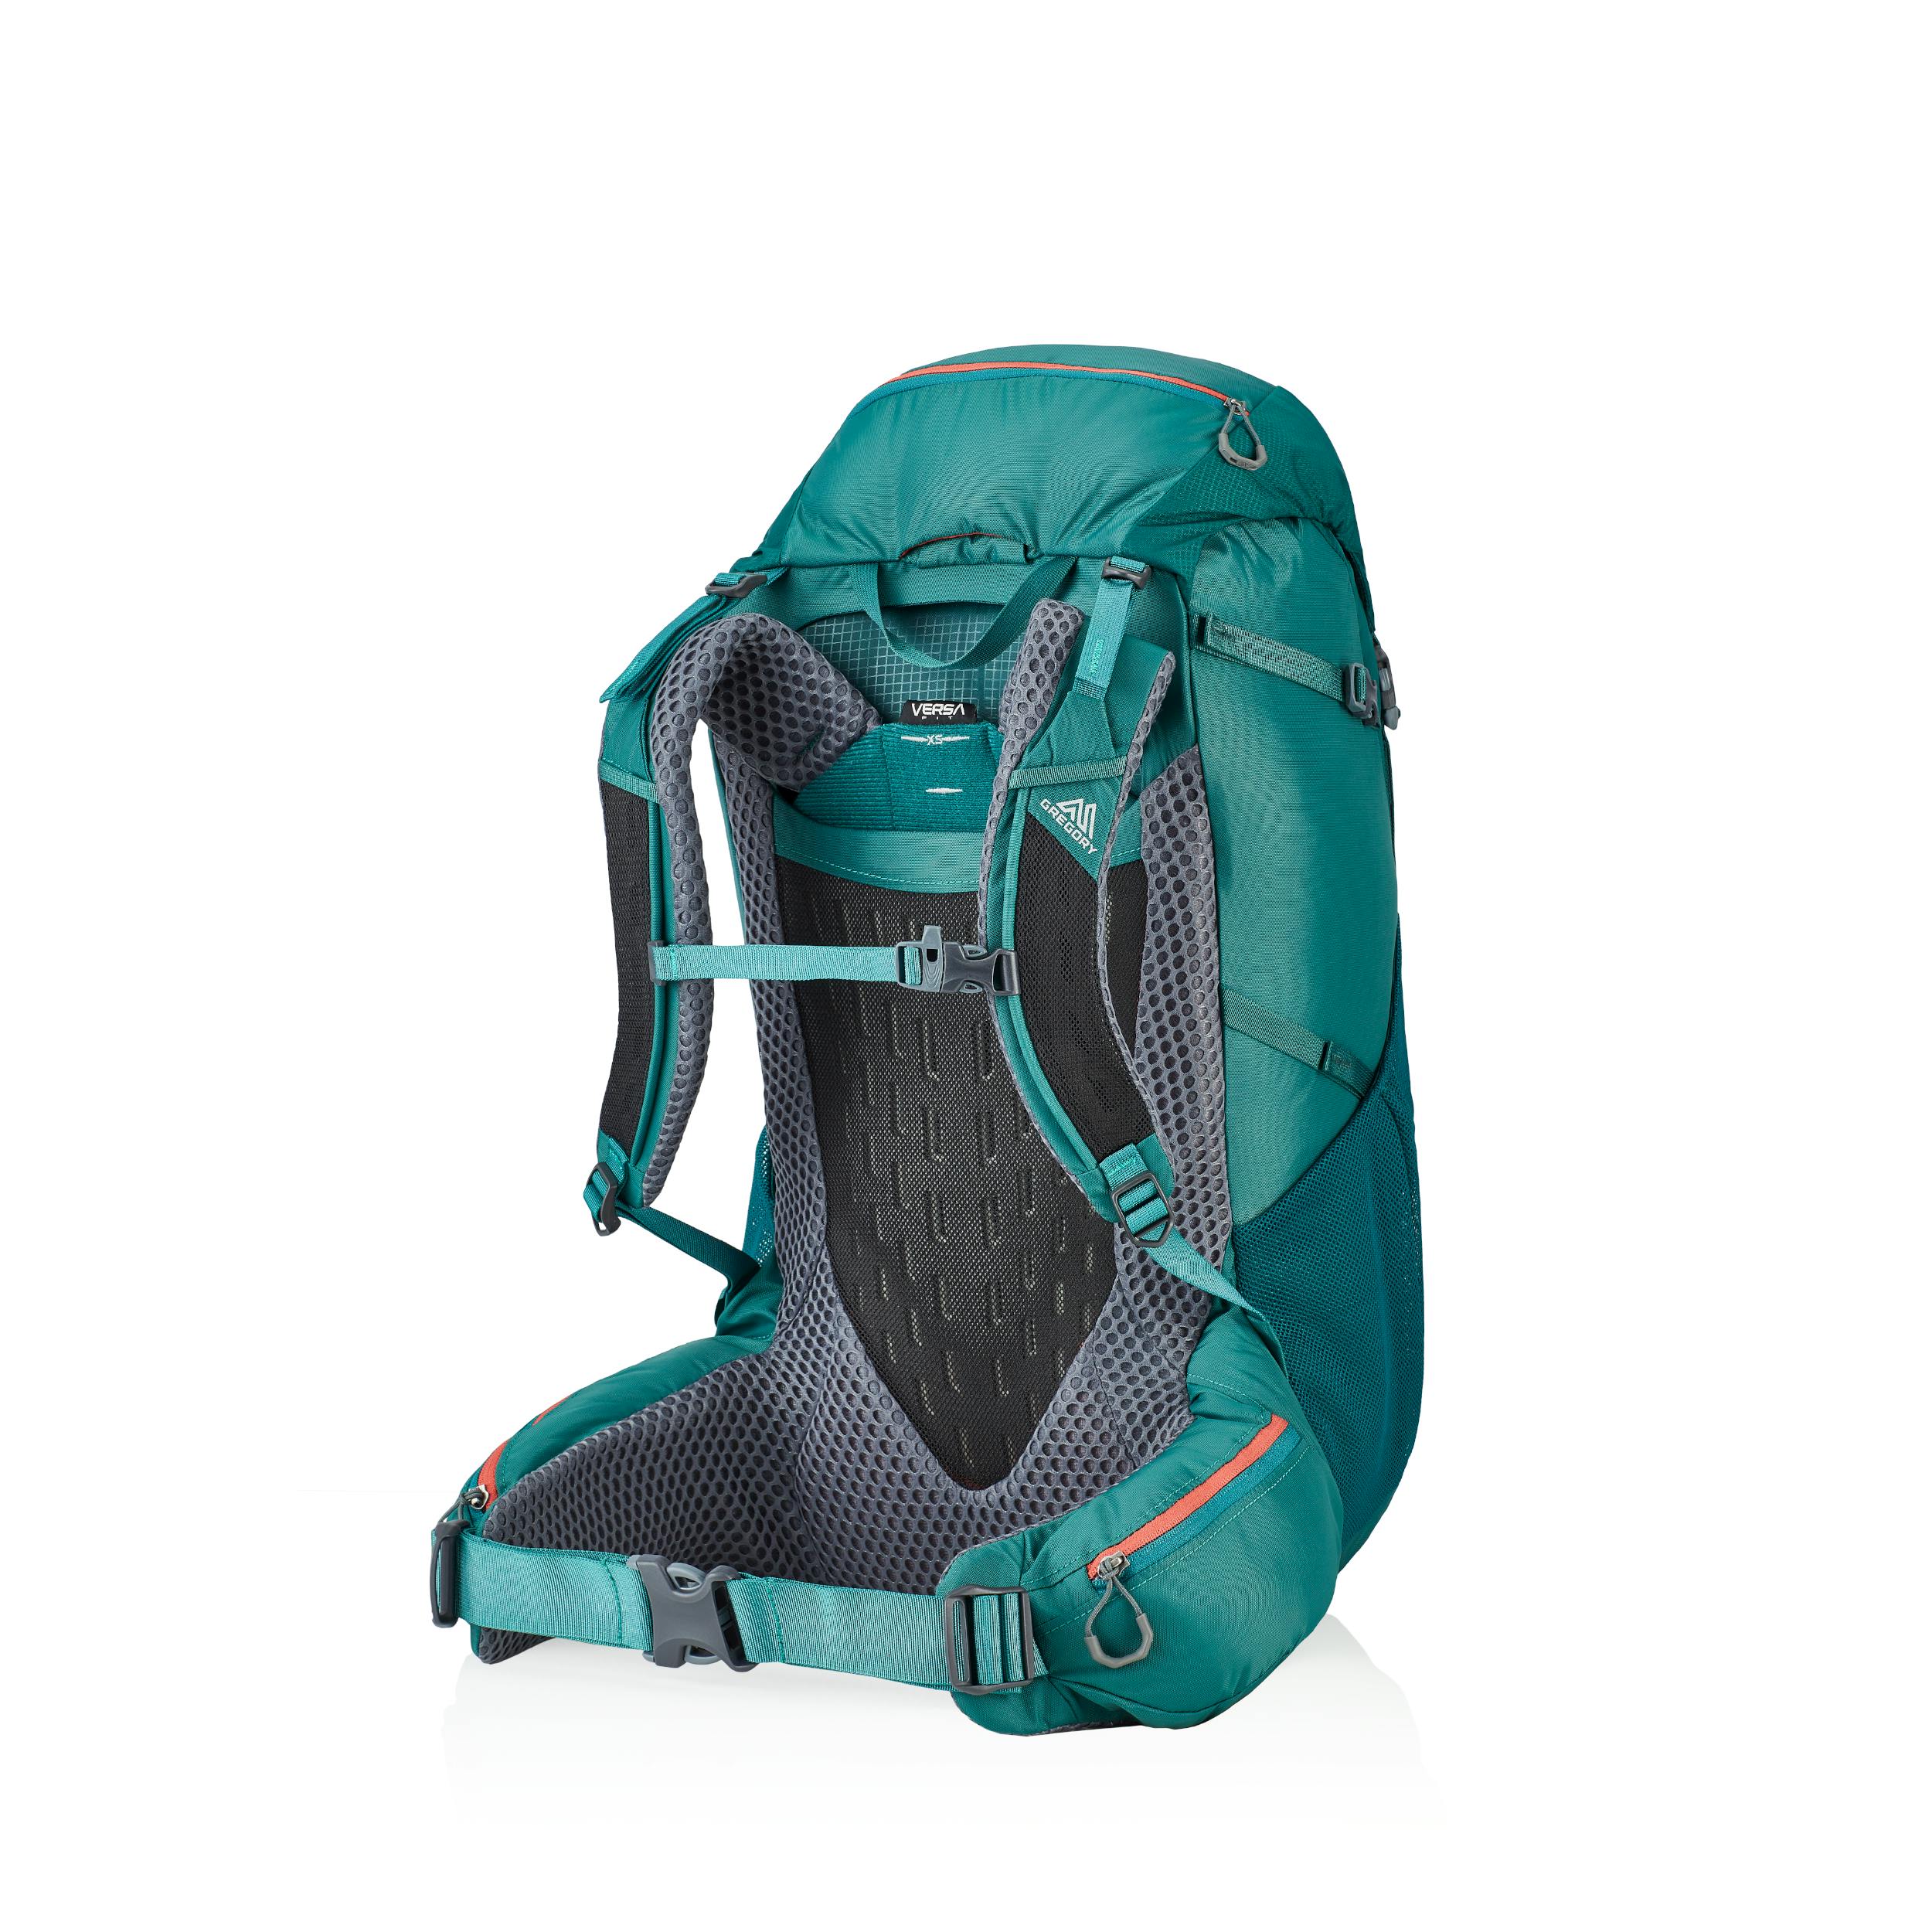 Gregory Amber 44L Backpack- Women's